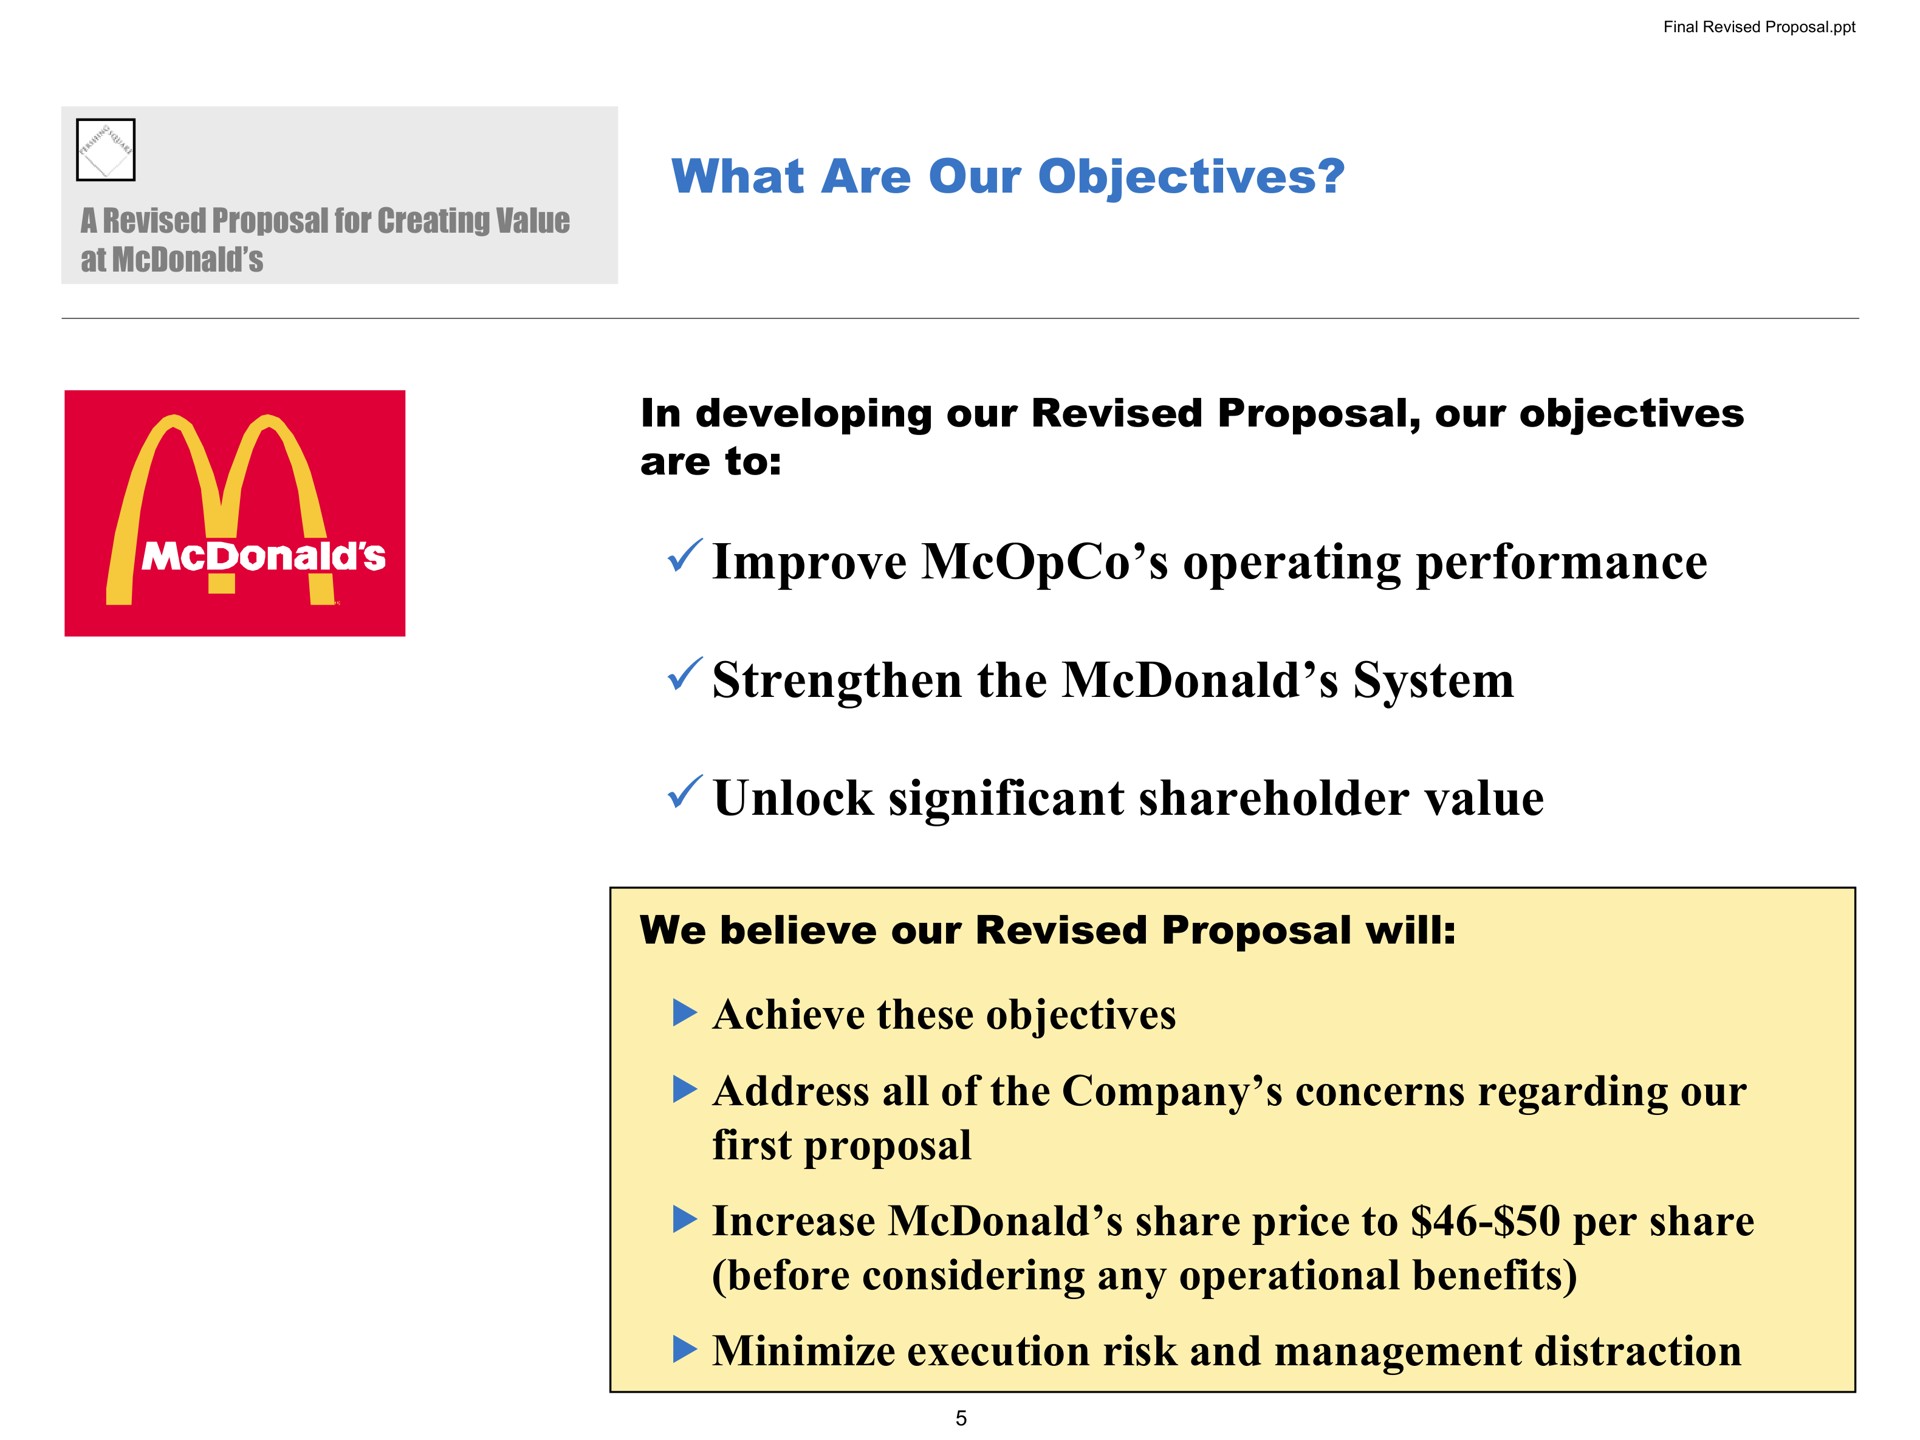 what are our objectives in developing our revised proposal our objectives are to improve operating performance strengthen the system unlock significant shareholder value we believe our revised proposal will achieve these objectives address all of the company concerns regarding our first proposal increase share price to per share before considering any operational benefits minimize execution risk and management distraction | Pershing Square